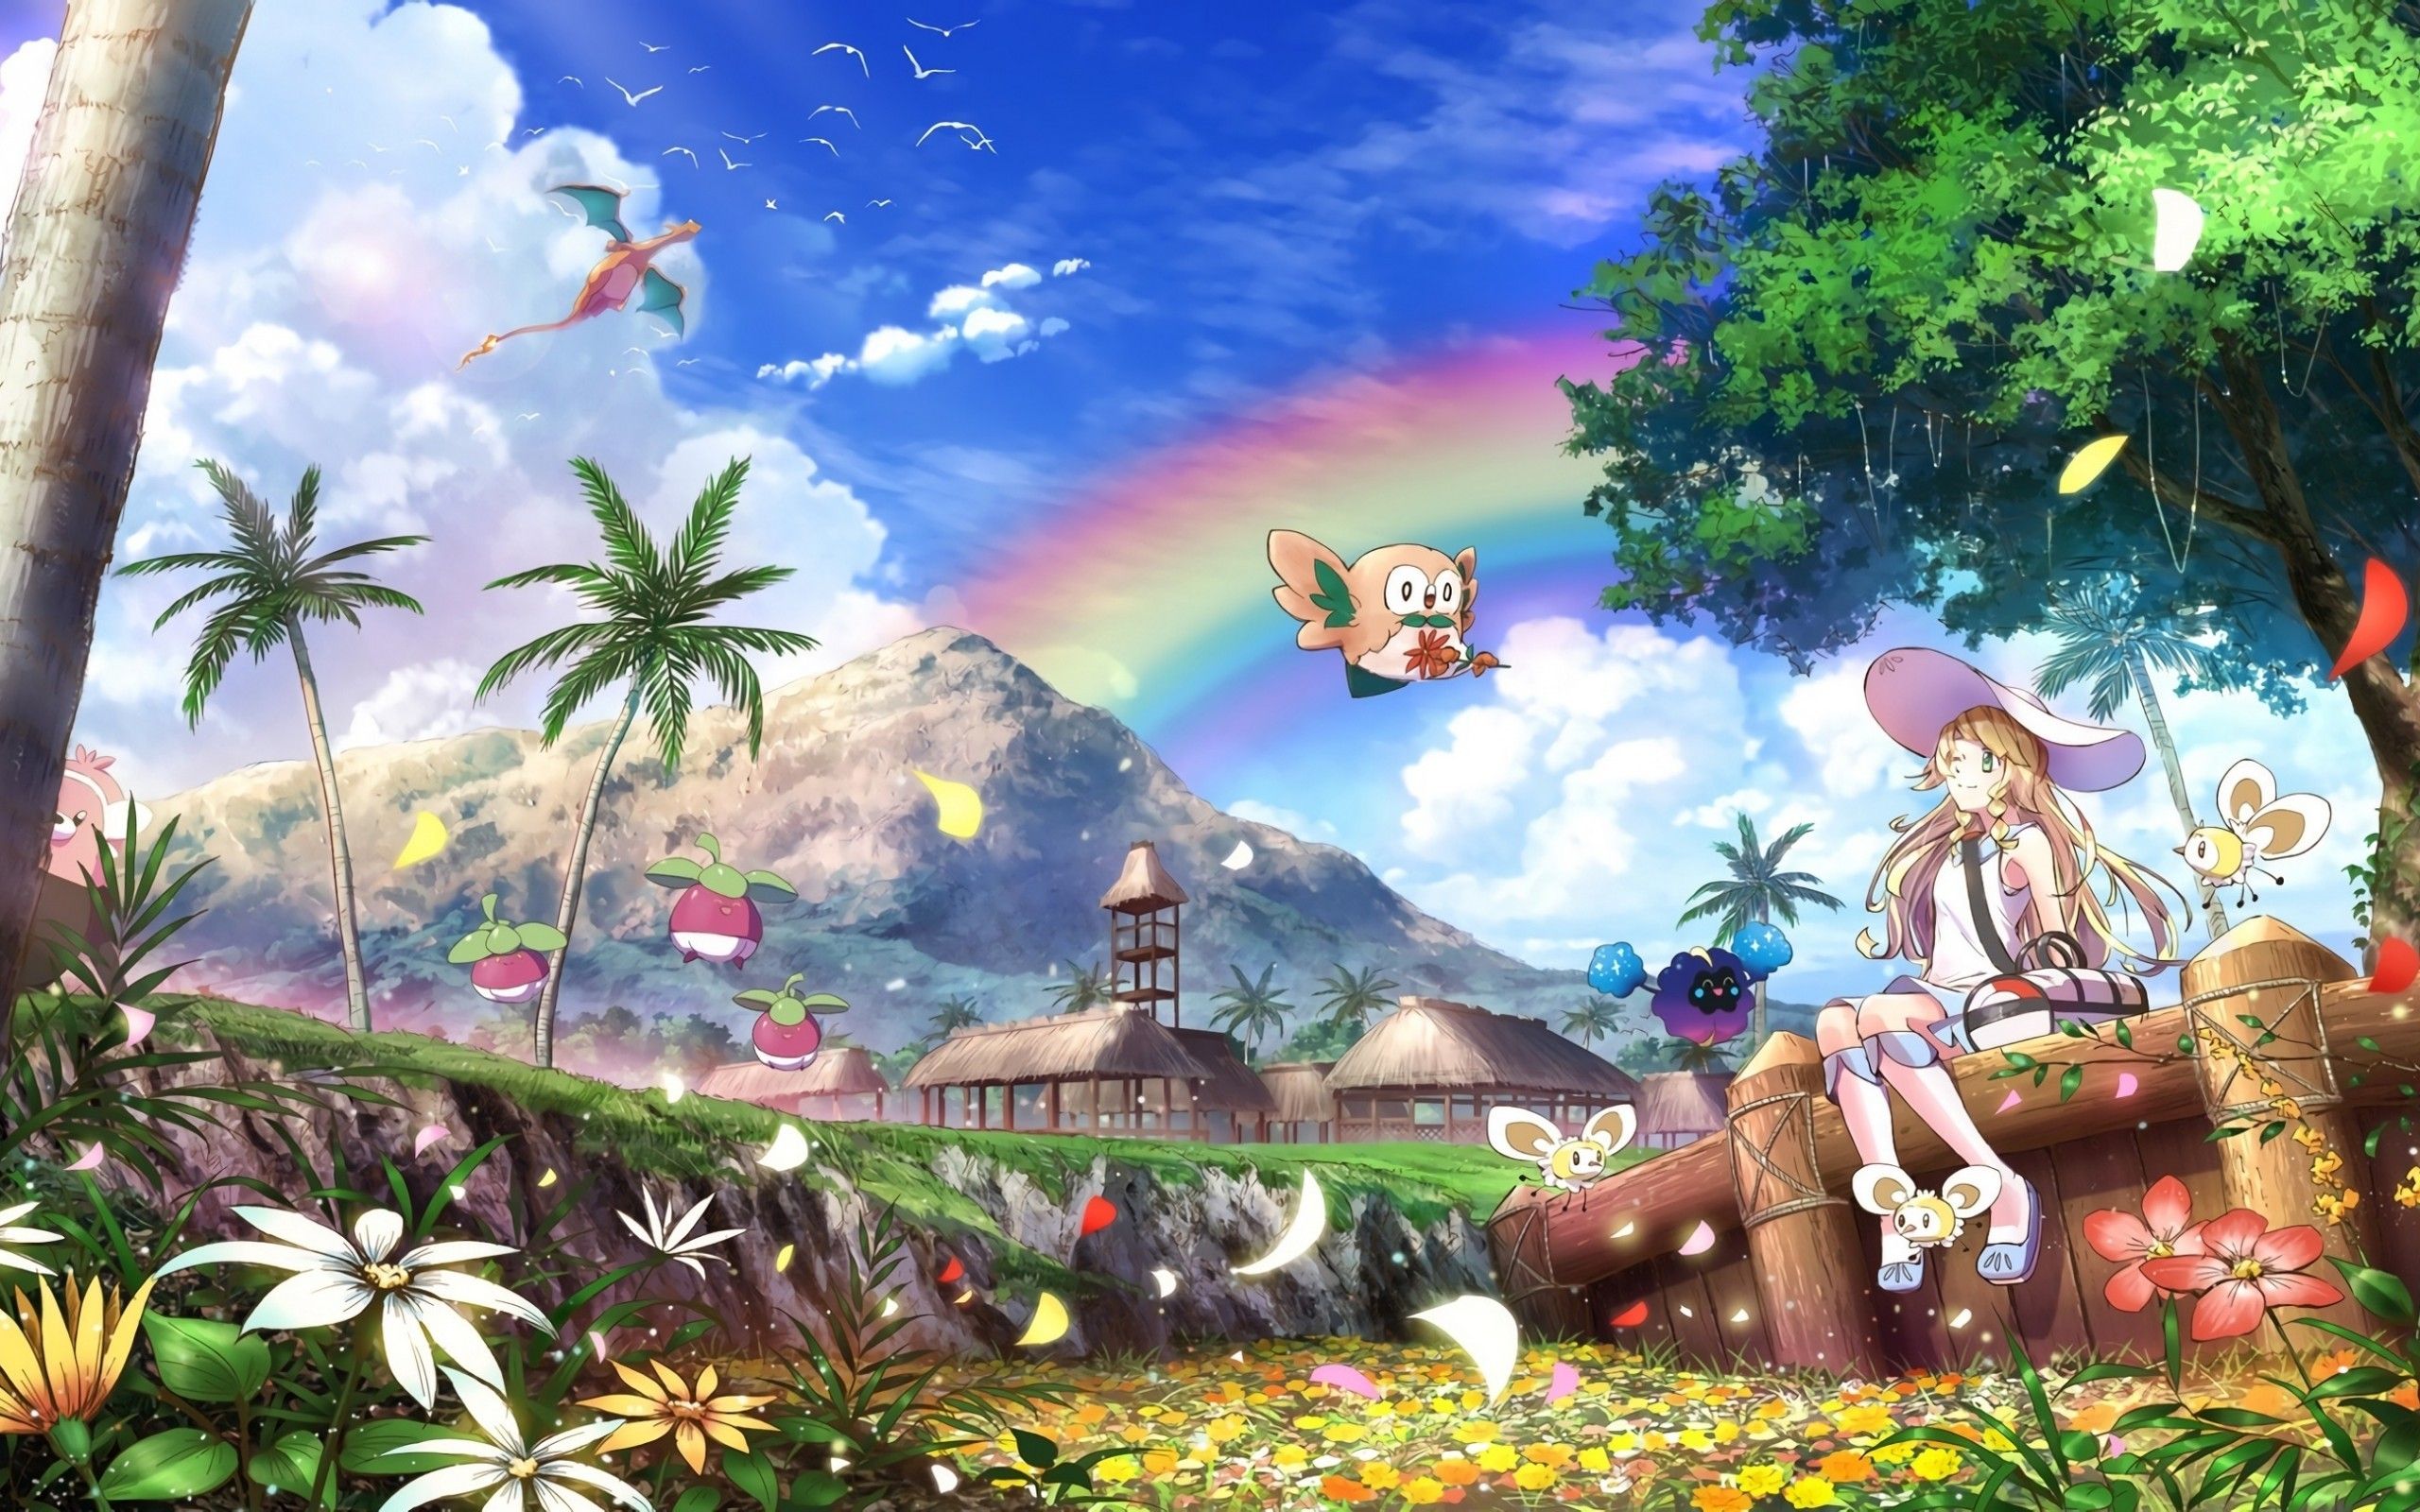 Download 2560x1600 Pokemon, Lillie, Rainbow, Nature, Clouds, Charizard, Flowers, Tree Wallpaper for MacBook Pro 13 inch